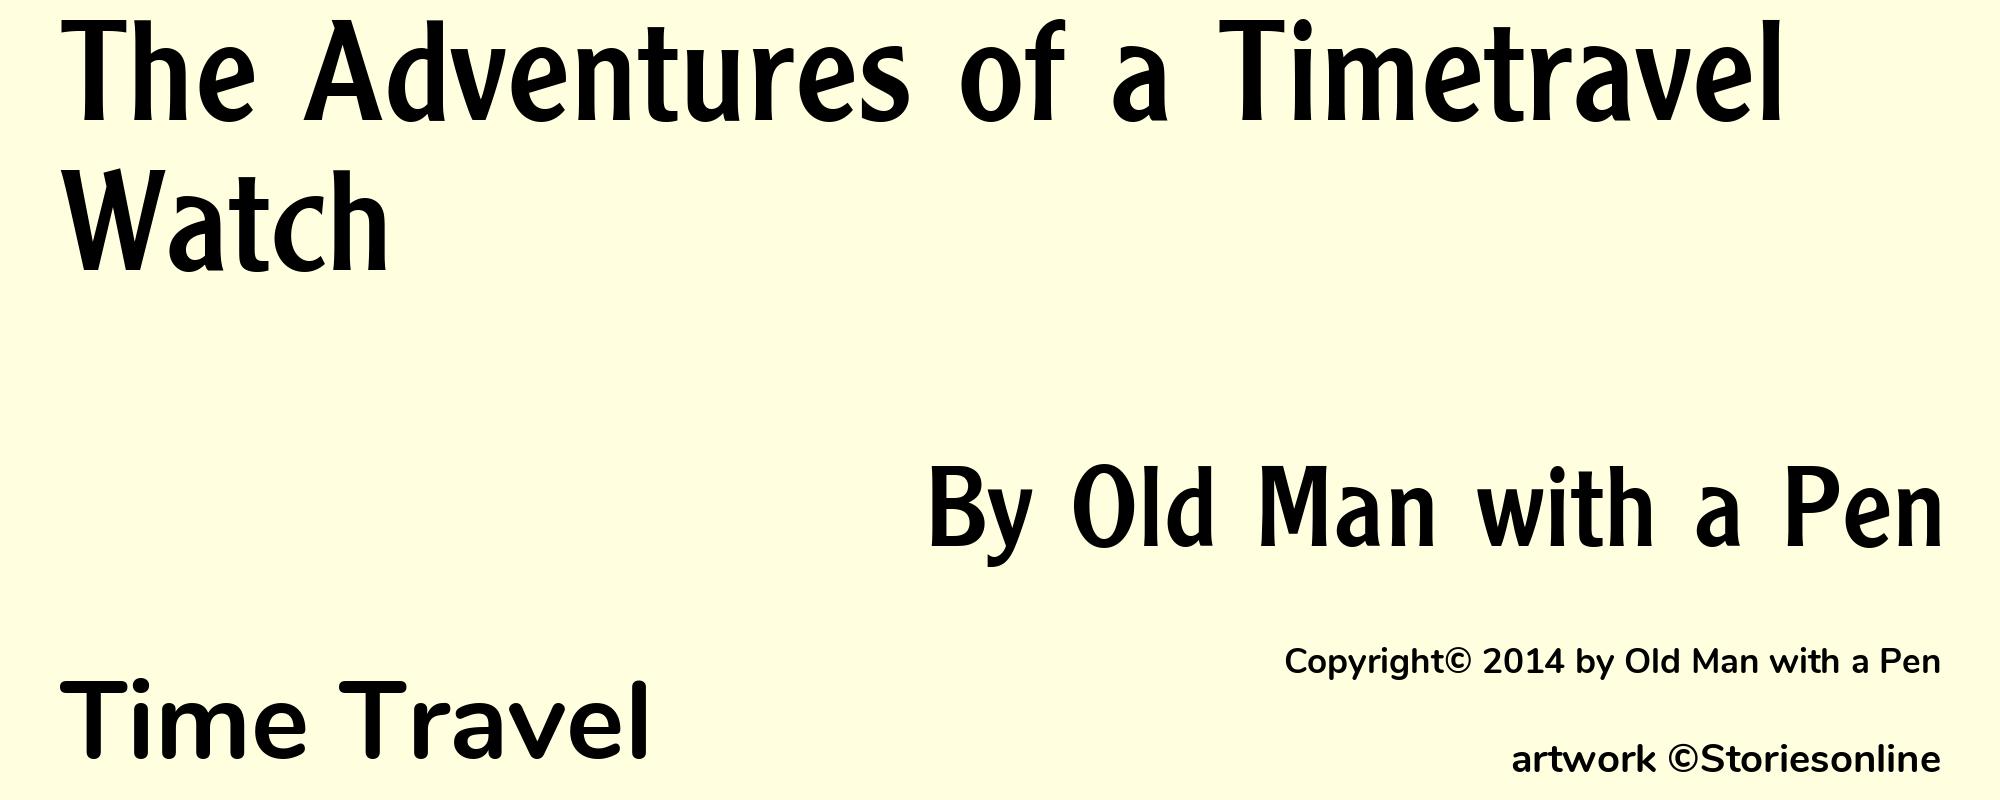 The Adventures of a Timetravel Watch - Cover